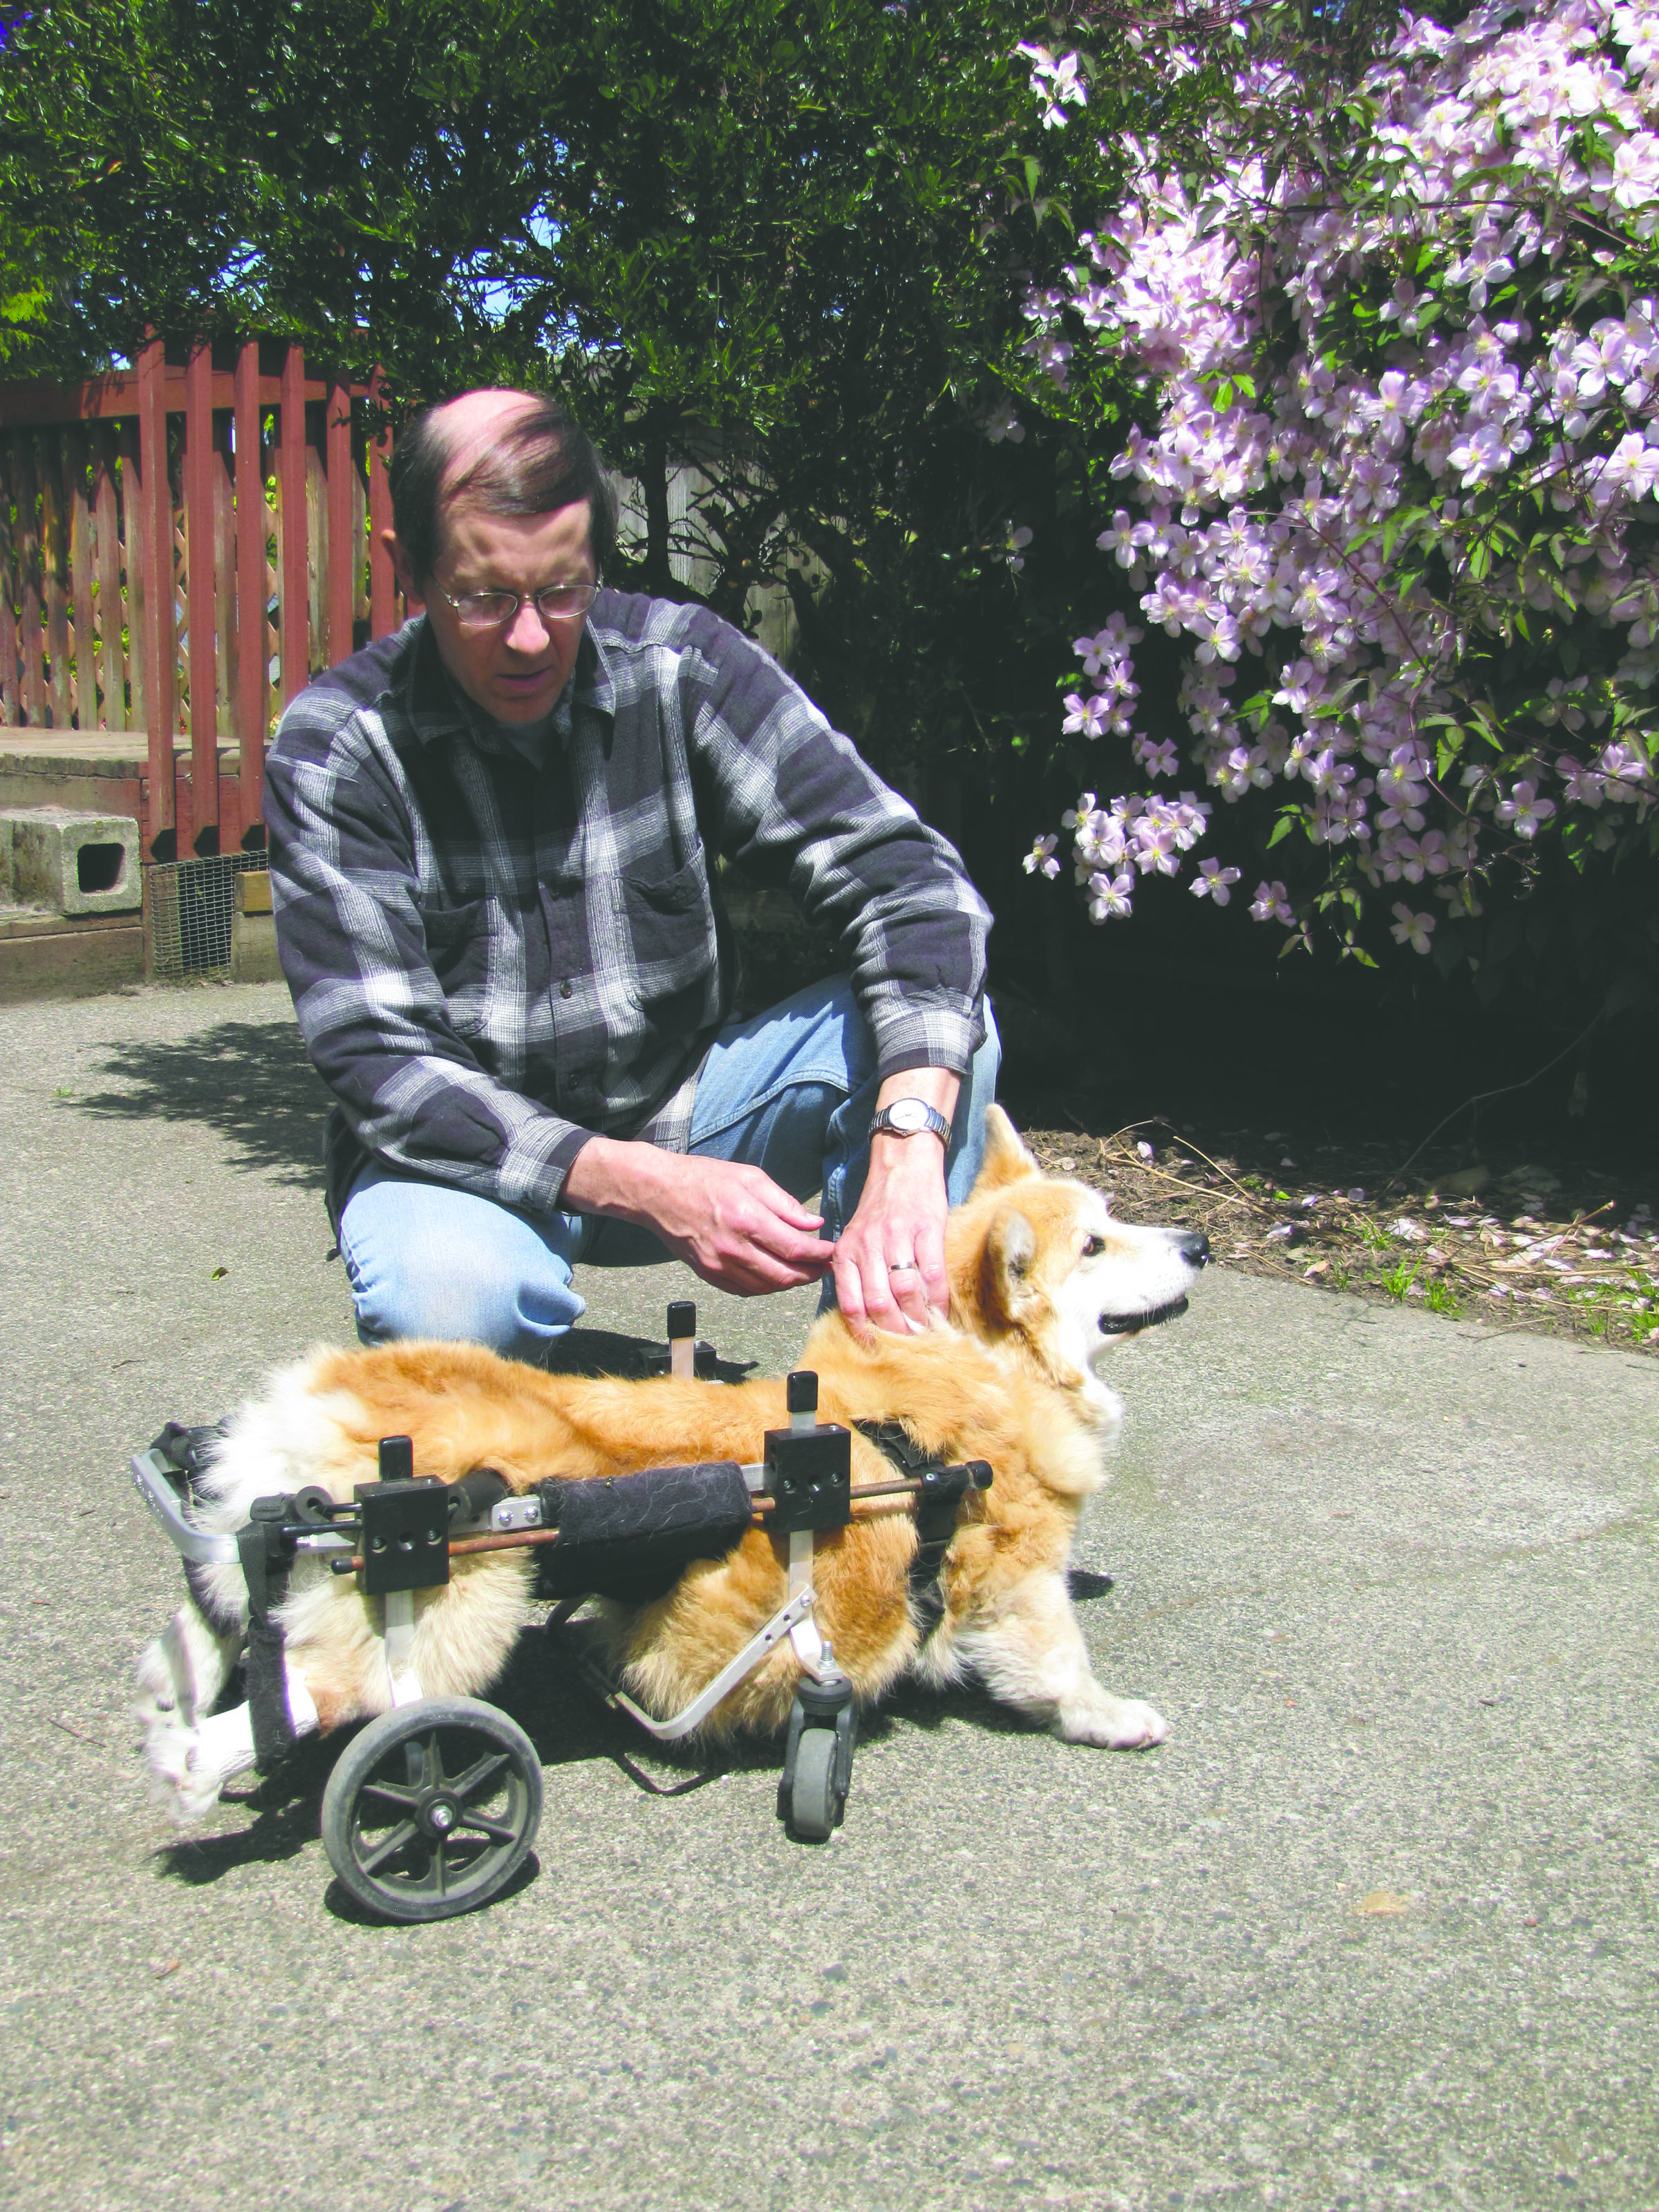 Tim Crowley is shown with his dog Sammy